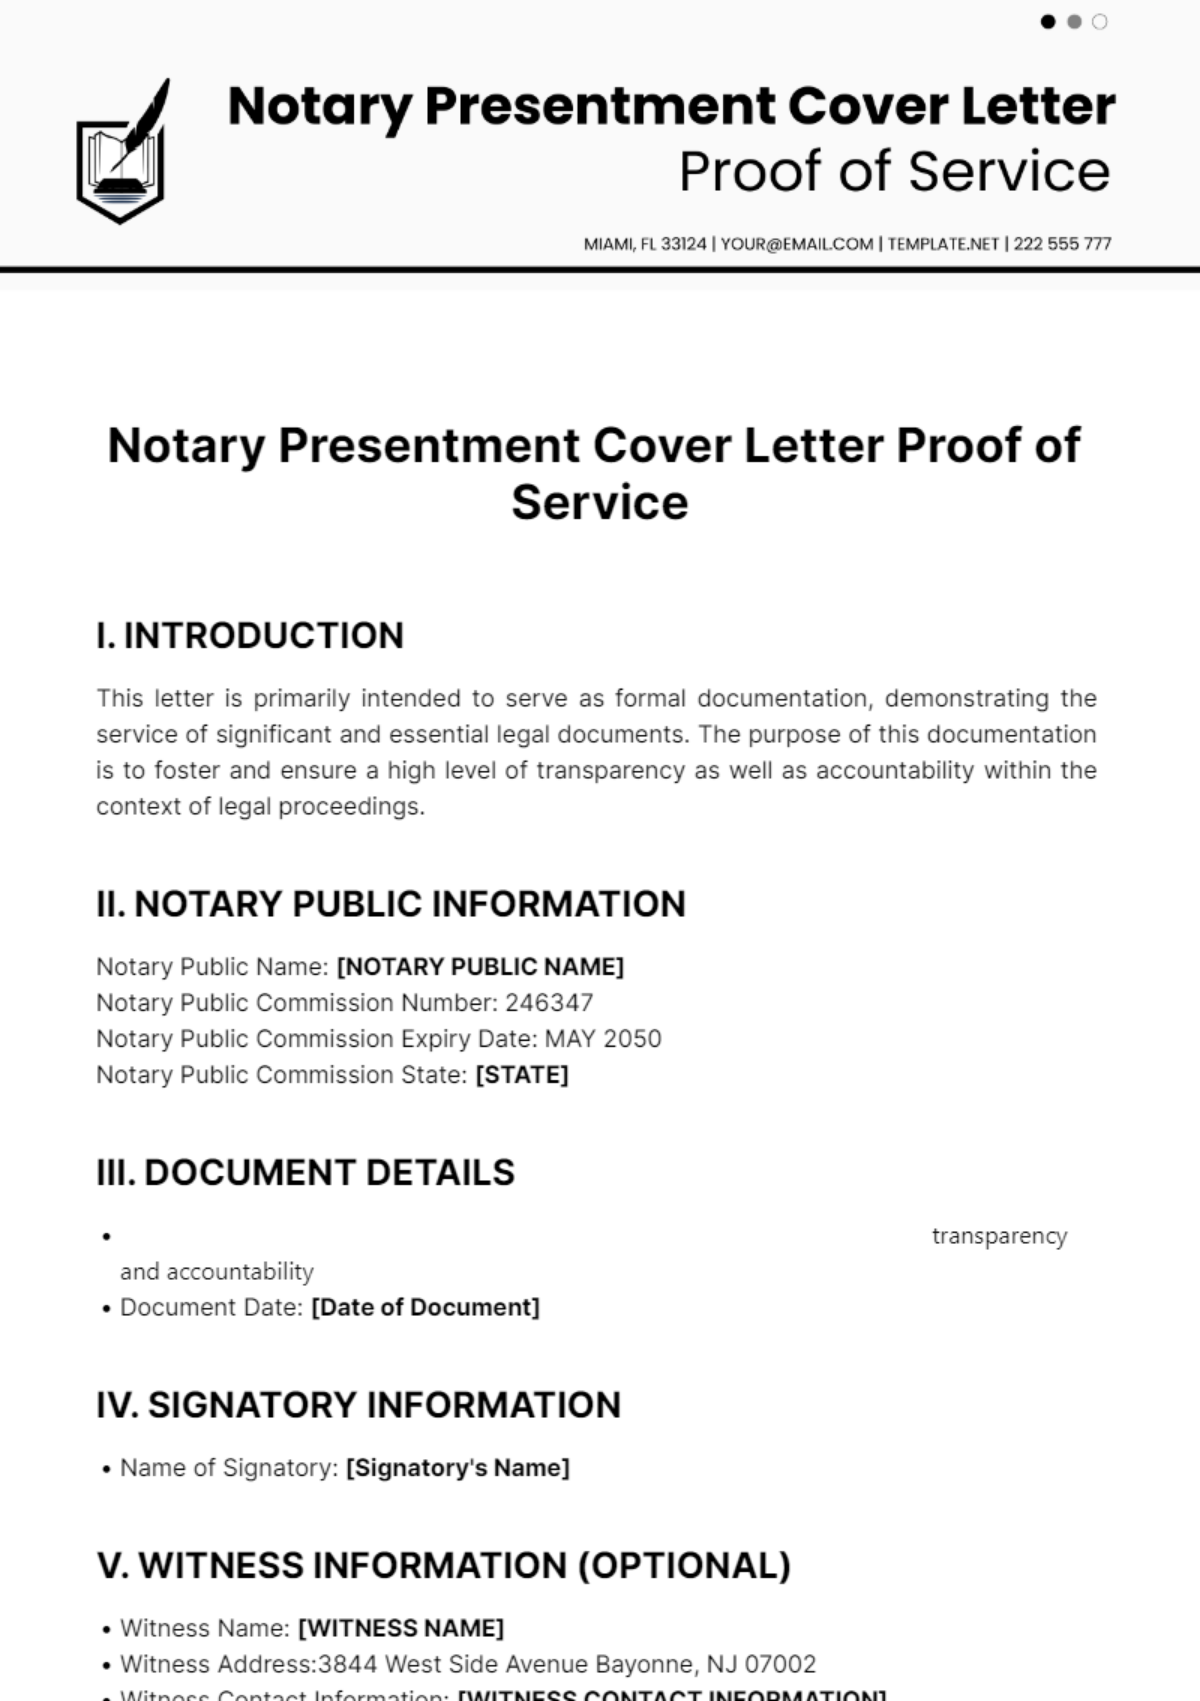 Notary Presentment Cover Letter Proof of Service Template